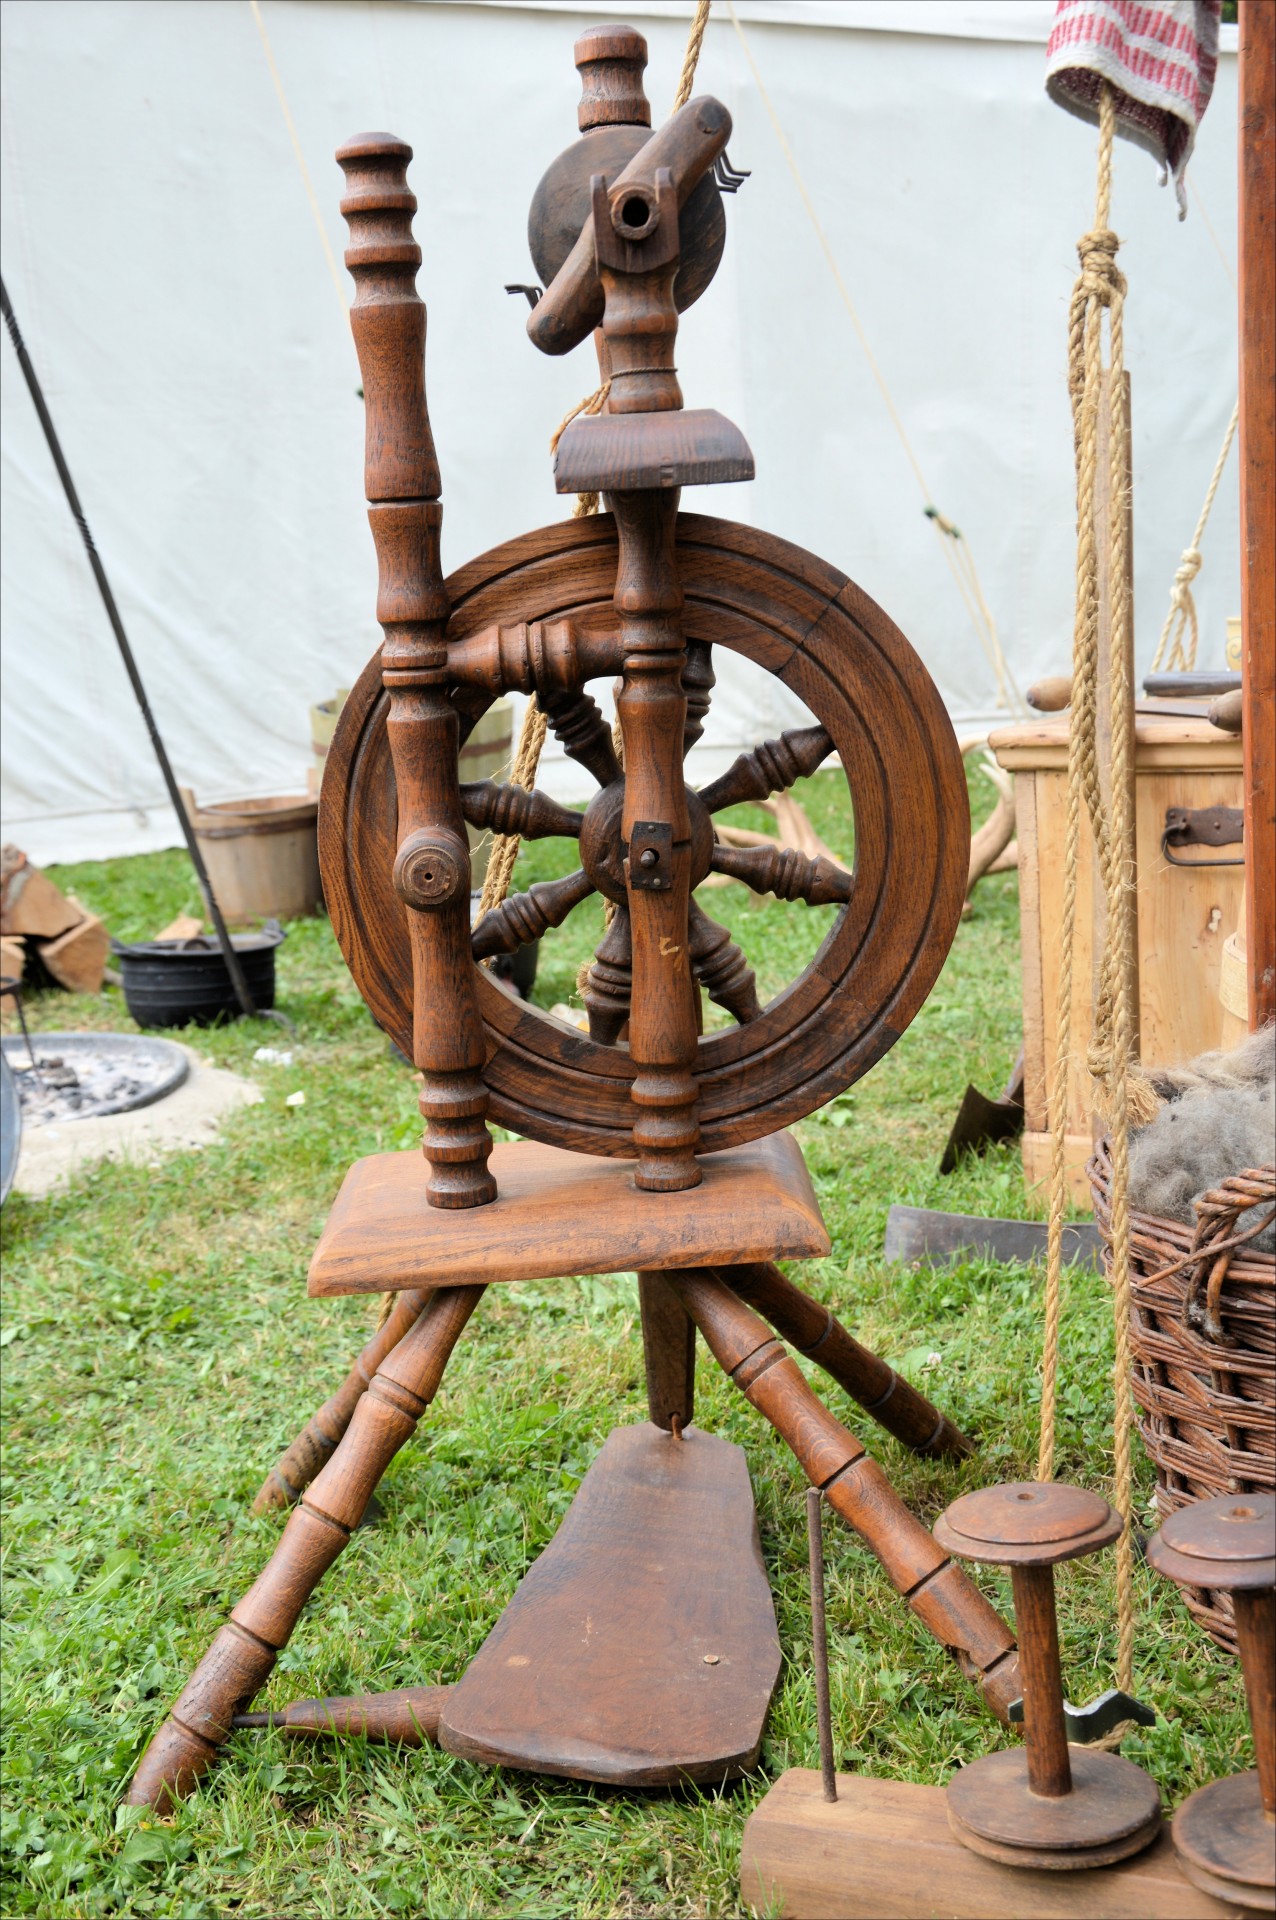 Spinning,middle ages,wool,yarn,spinning wheel - free image from